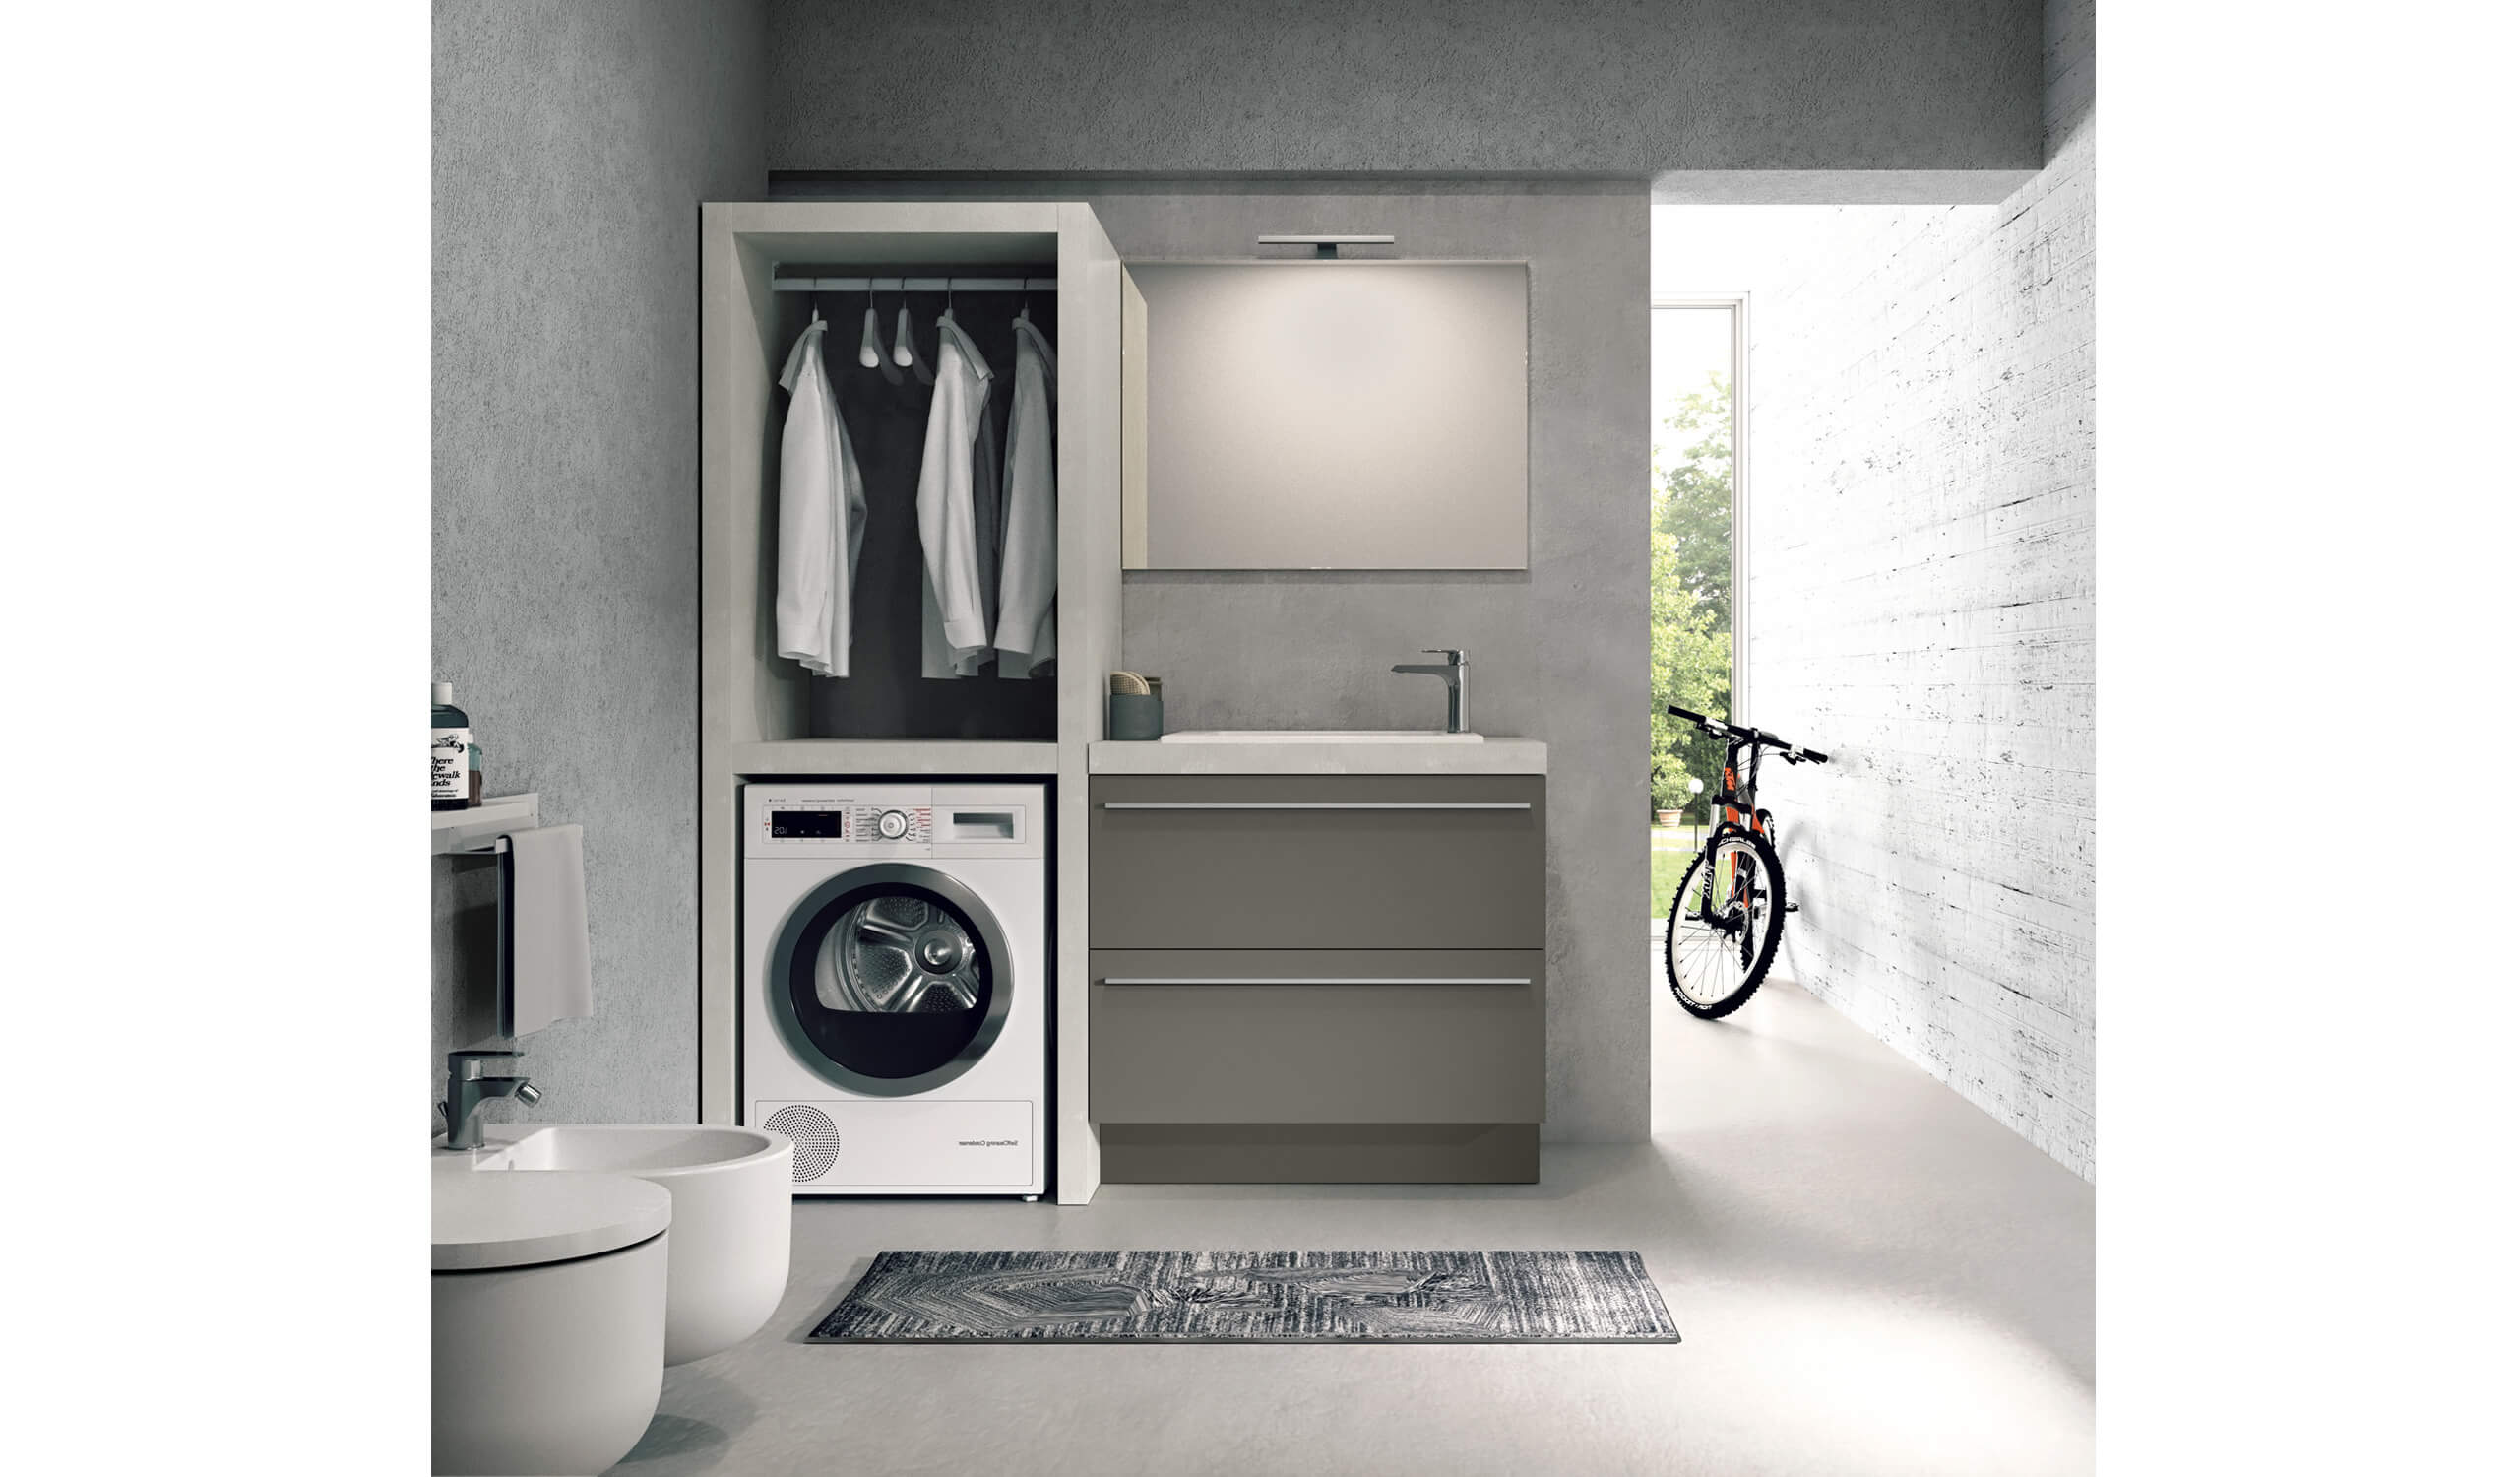 STORE 405 Laundry room cabinet By Gruppo Geromin